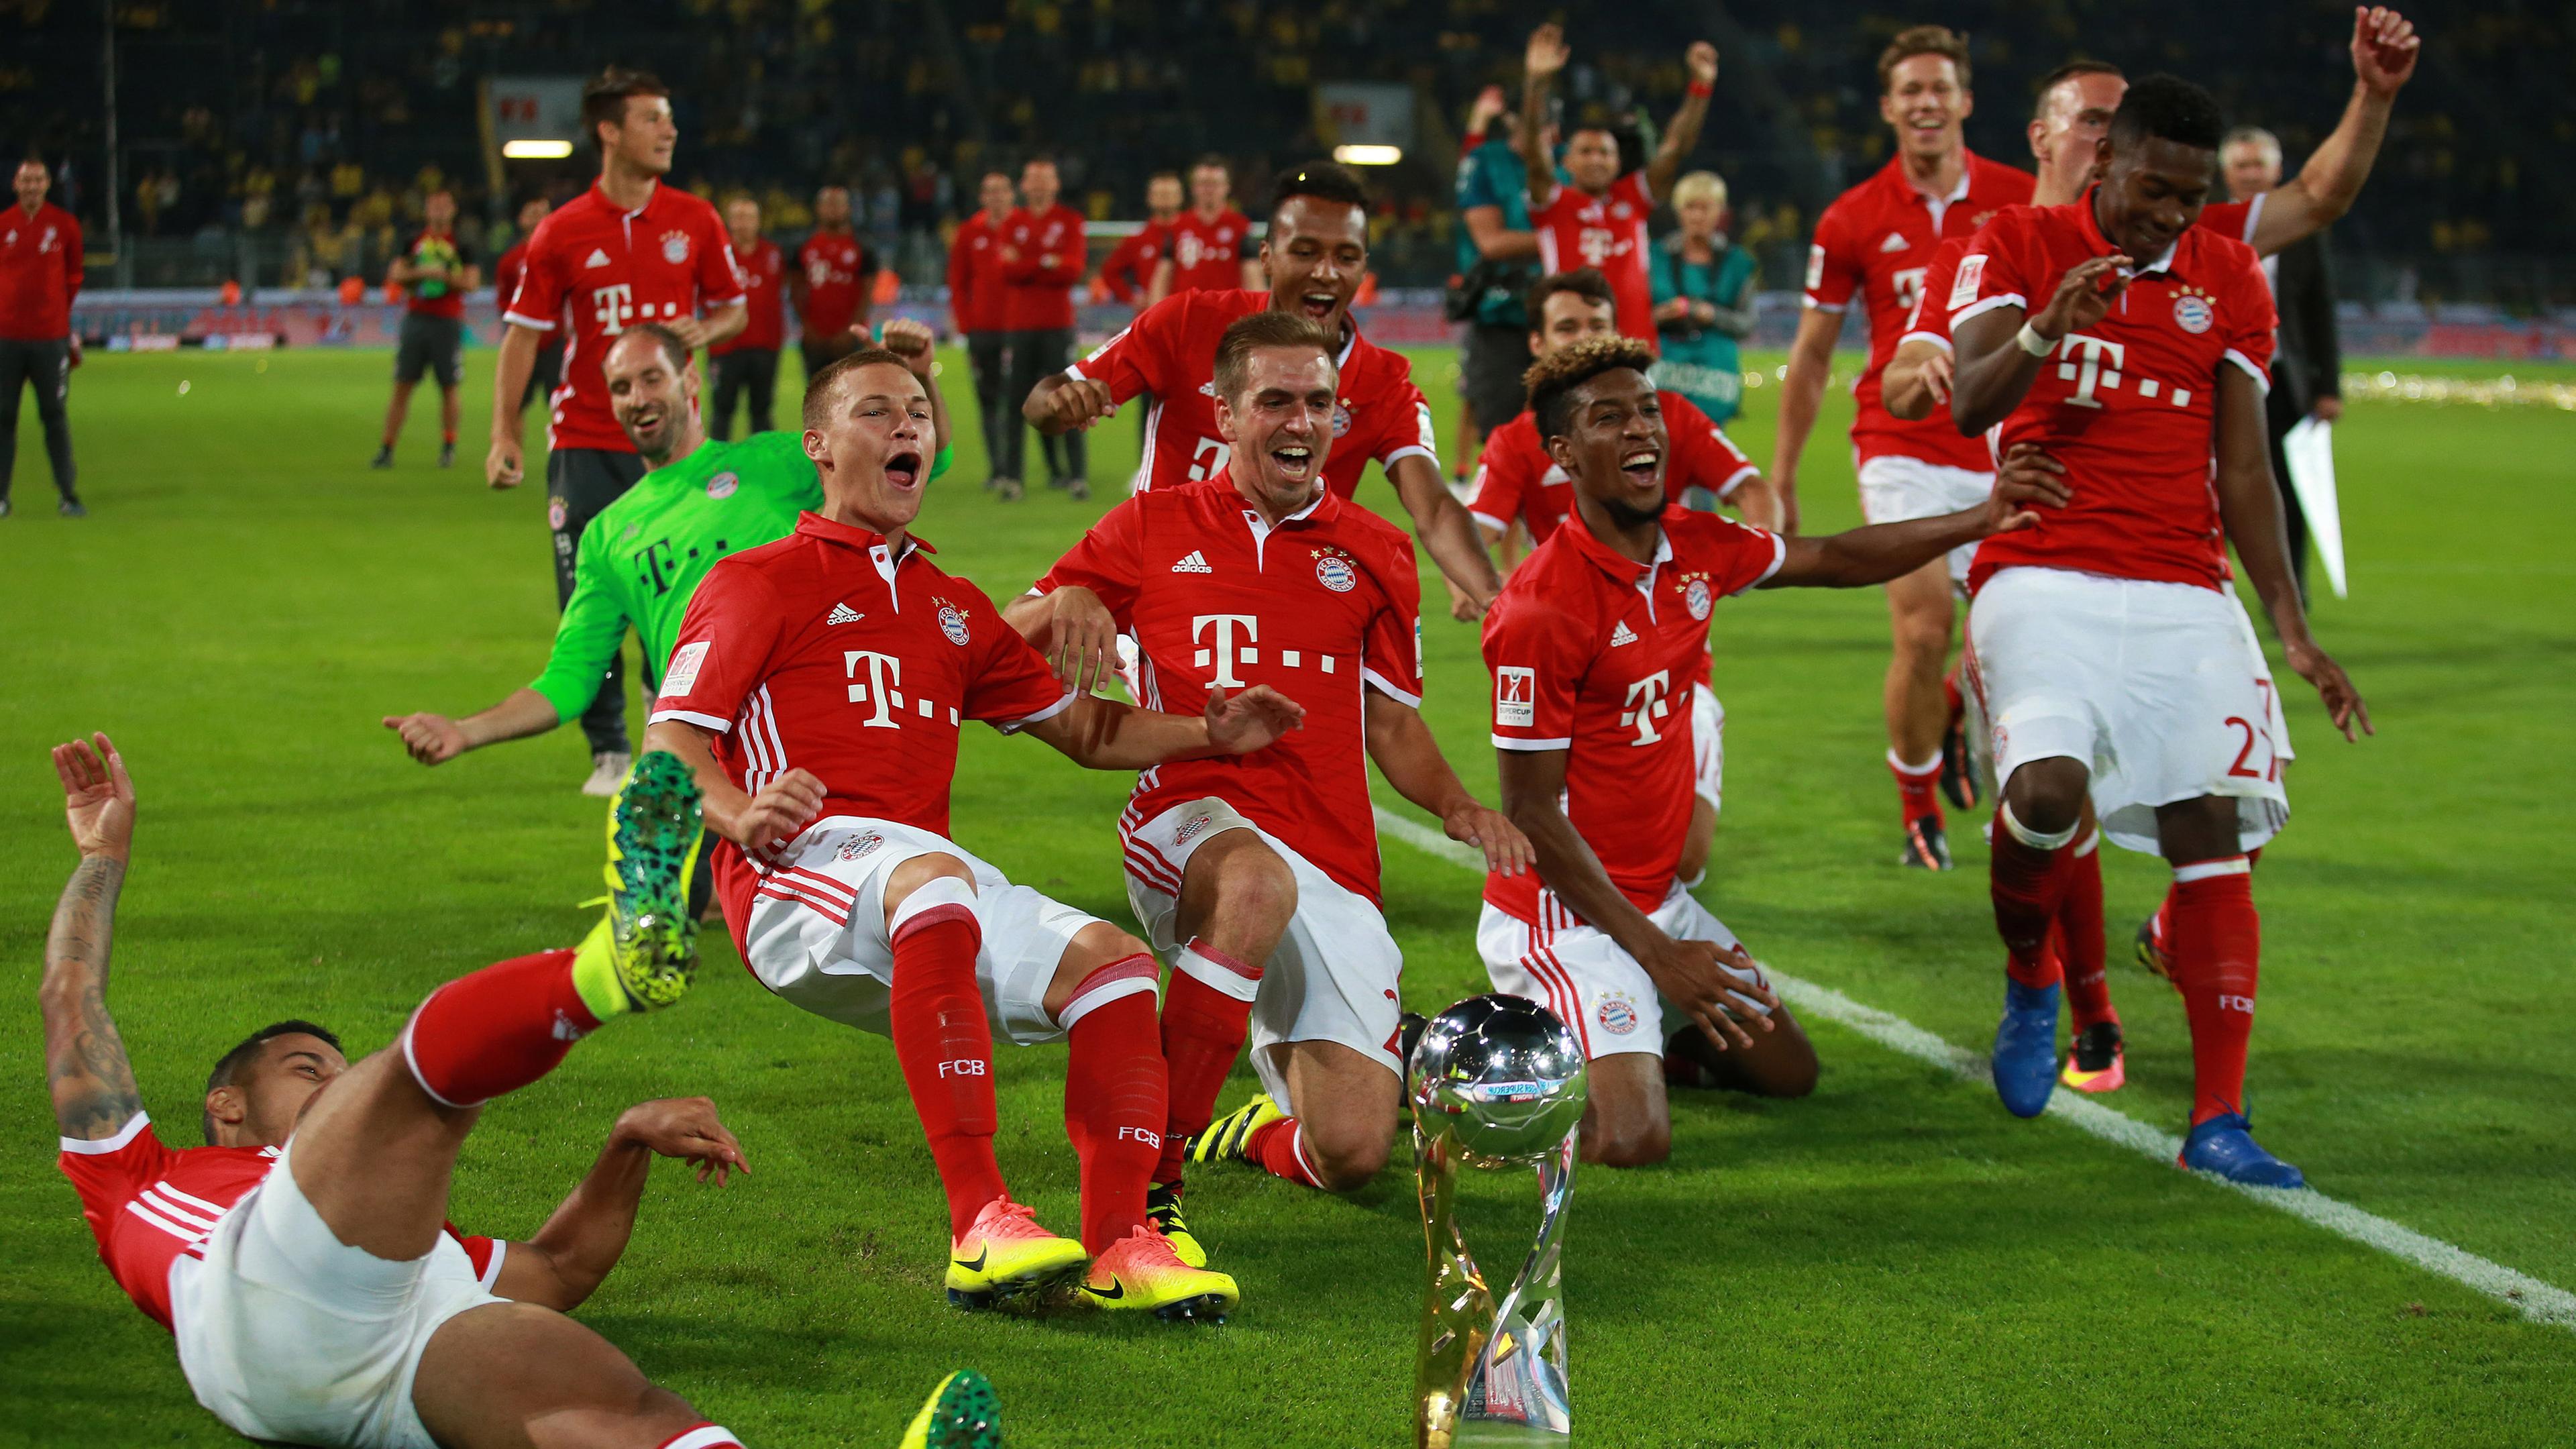 fc bayern muenchen ist dfb-supercupsiger 2016